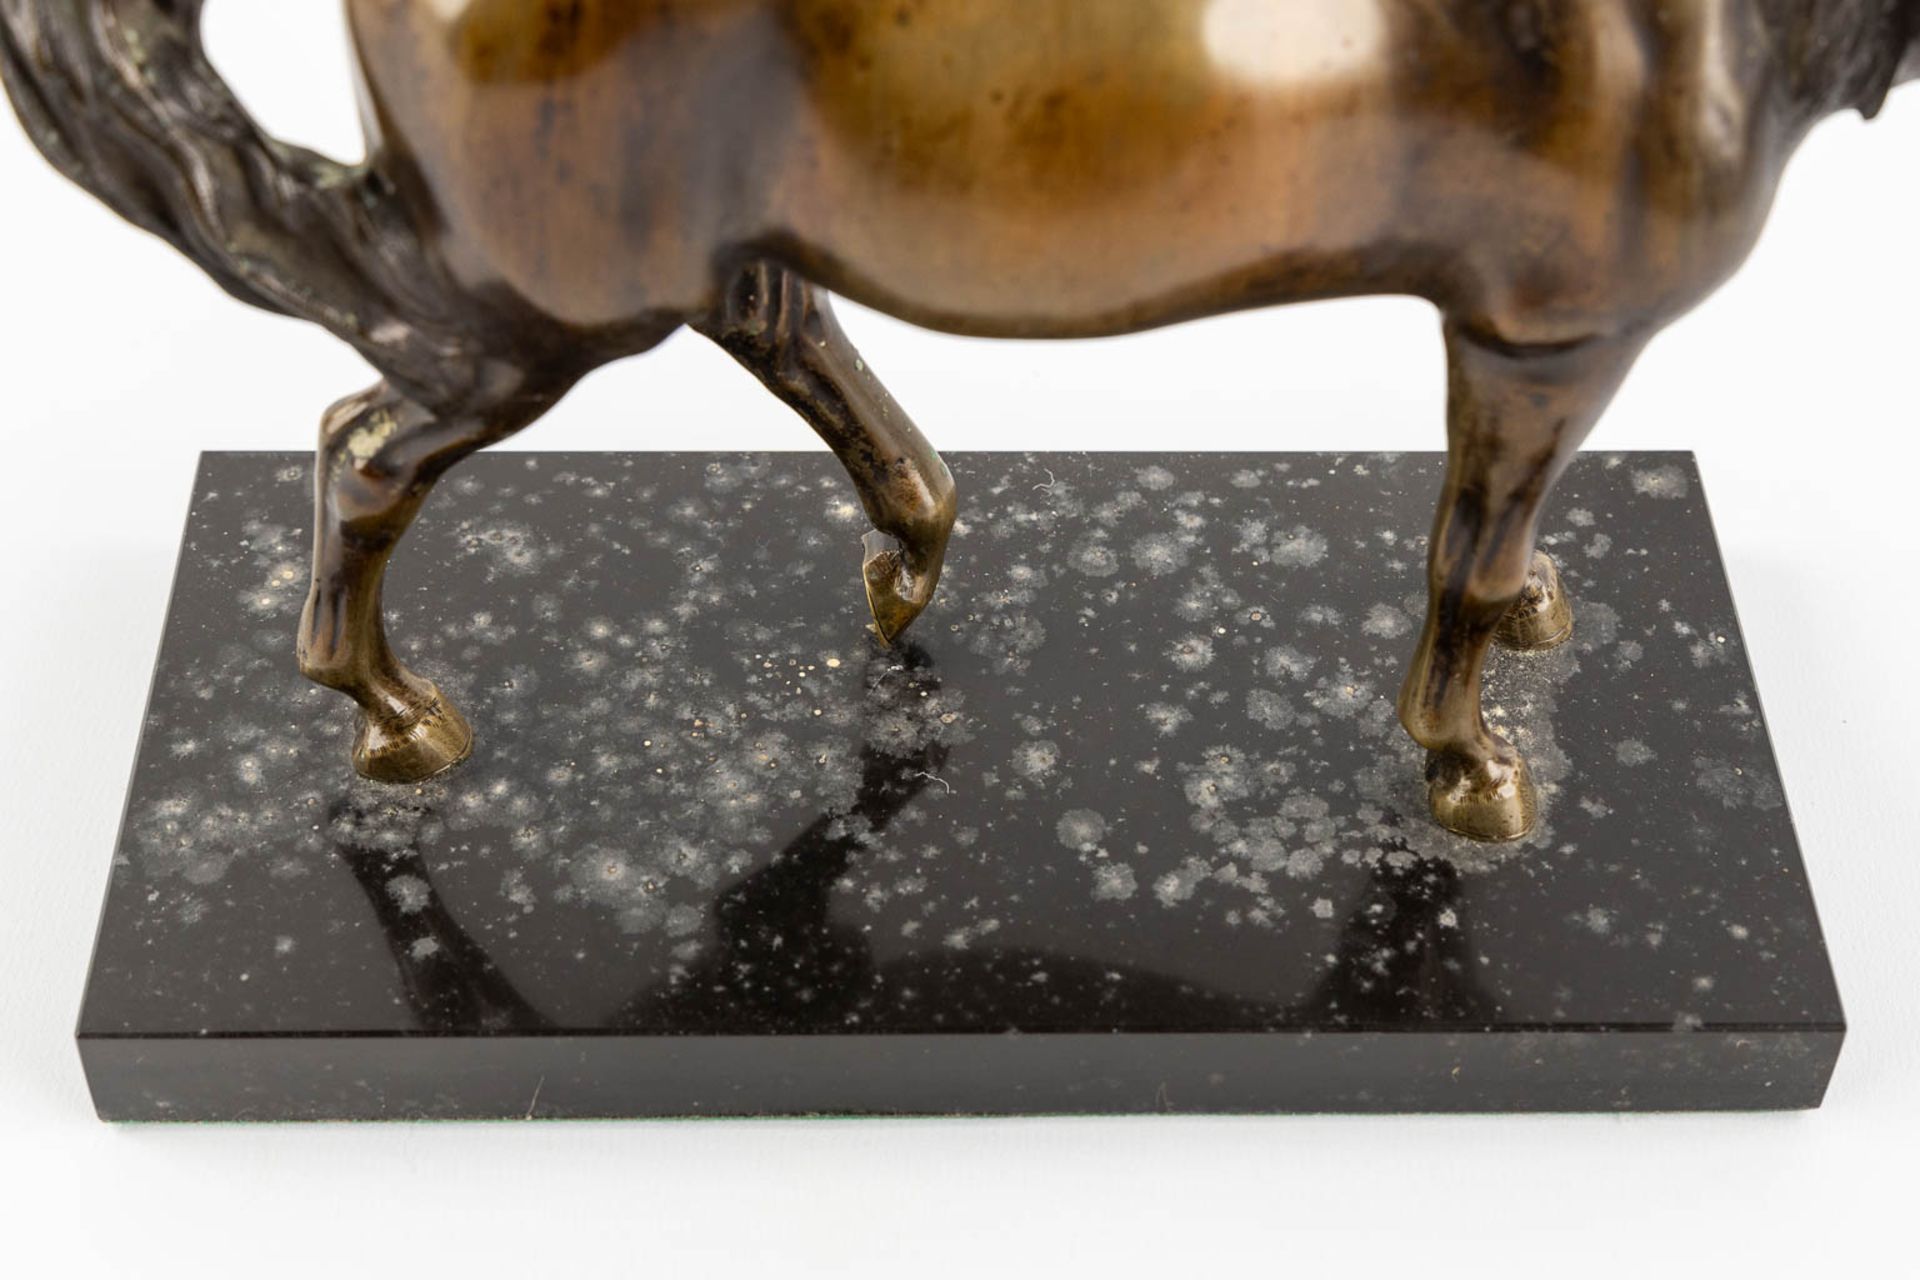 A patinated bronze figurine of a horse, black marble. (L:11 x W:27 x H:18 cm) - Image 8 of 9